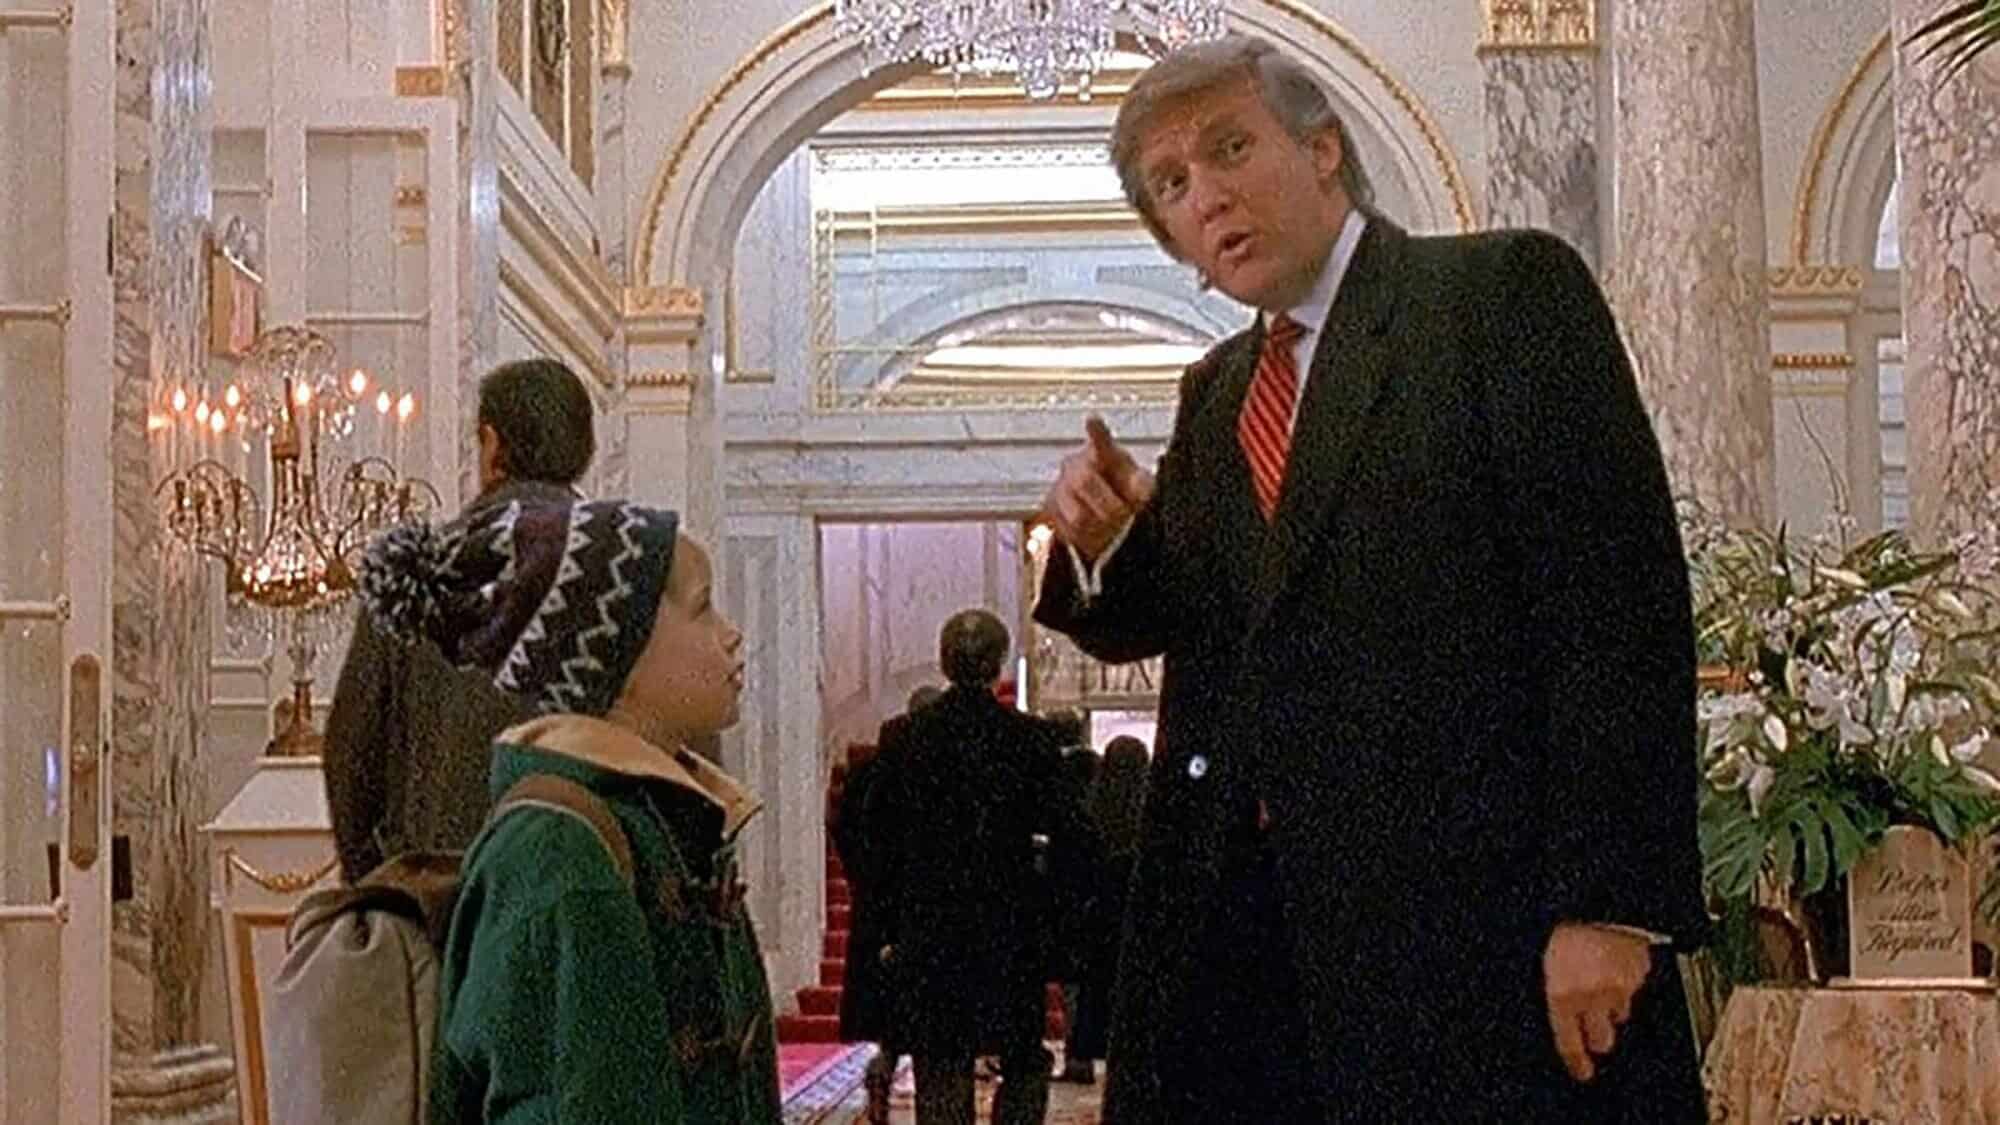 Home Alone 2 star Trump resigns from Screen Actors Guild in a huff after they threaten to expel him